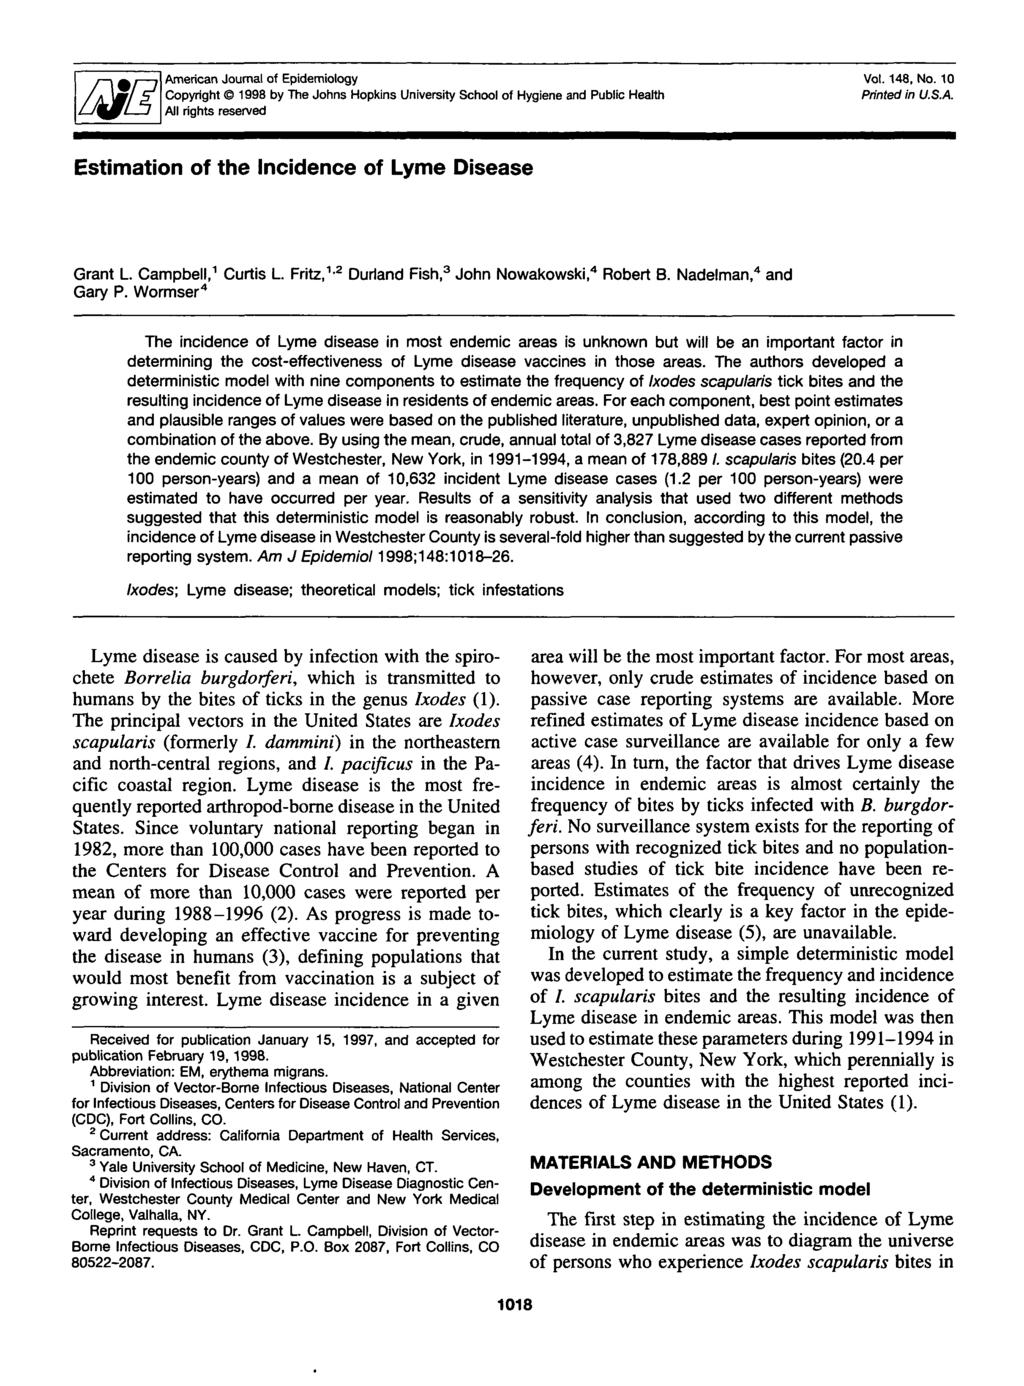 American Journal of Epidemiology Copyright 1998 by The Johns Hopkins University School of Hygiene and Public Health All rights reserved Vol. 148, No. 10 Printed in U.S.A. Estimation of the Incidence of Lyme Disease Grant L Campbell, 1 Curtis L Fritz, 1-2 Durland Fish, 3 John Nowakowski, 4 Robert B.